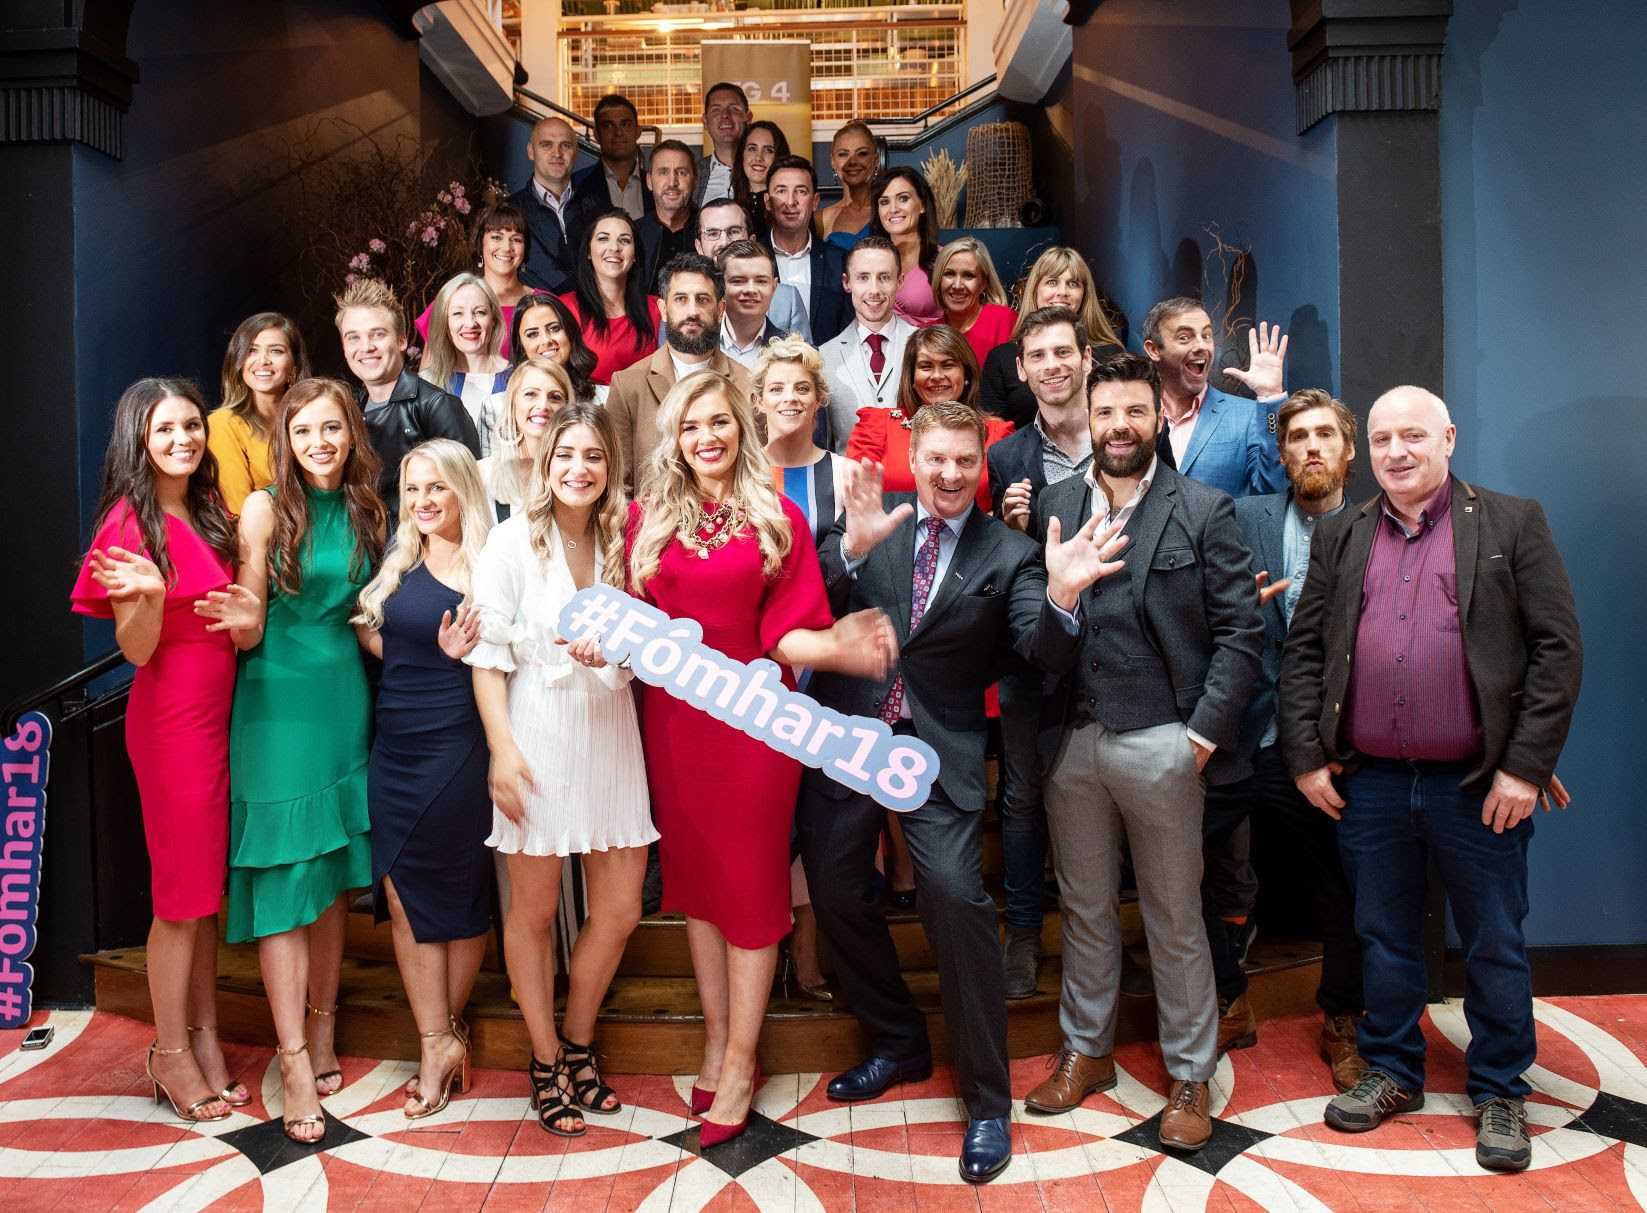 TG4 marks 'creativity and connection' at autumn launch